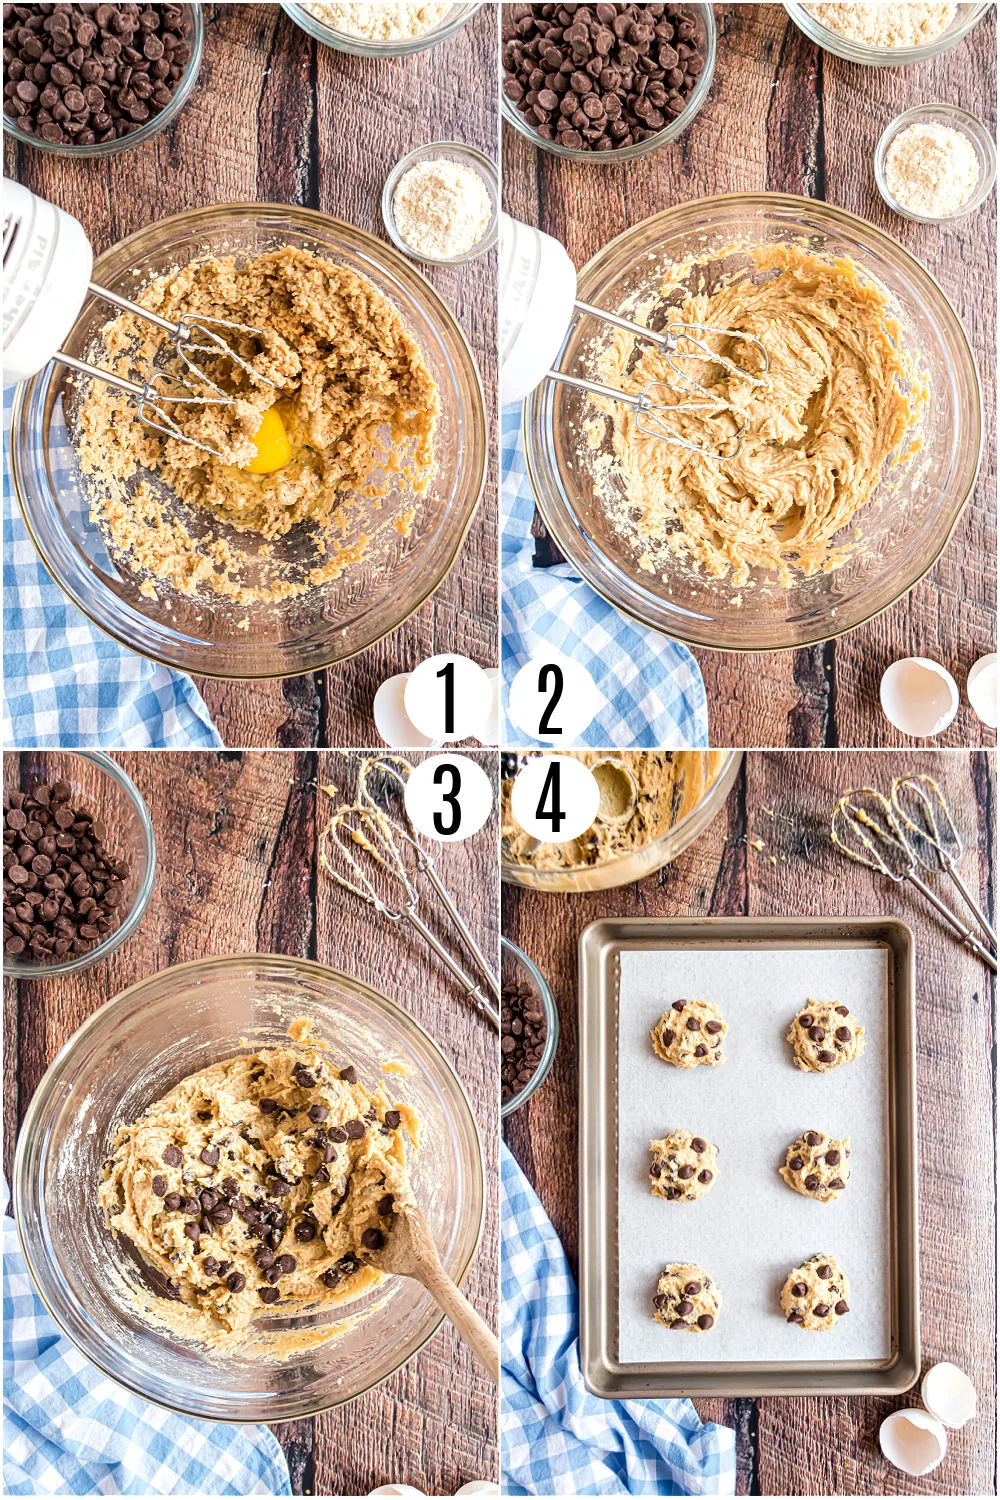 Step by step photos showing how to make keto chocolate chip cookies.